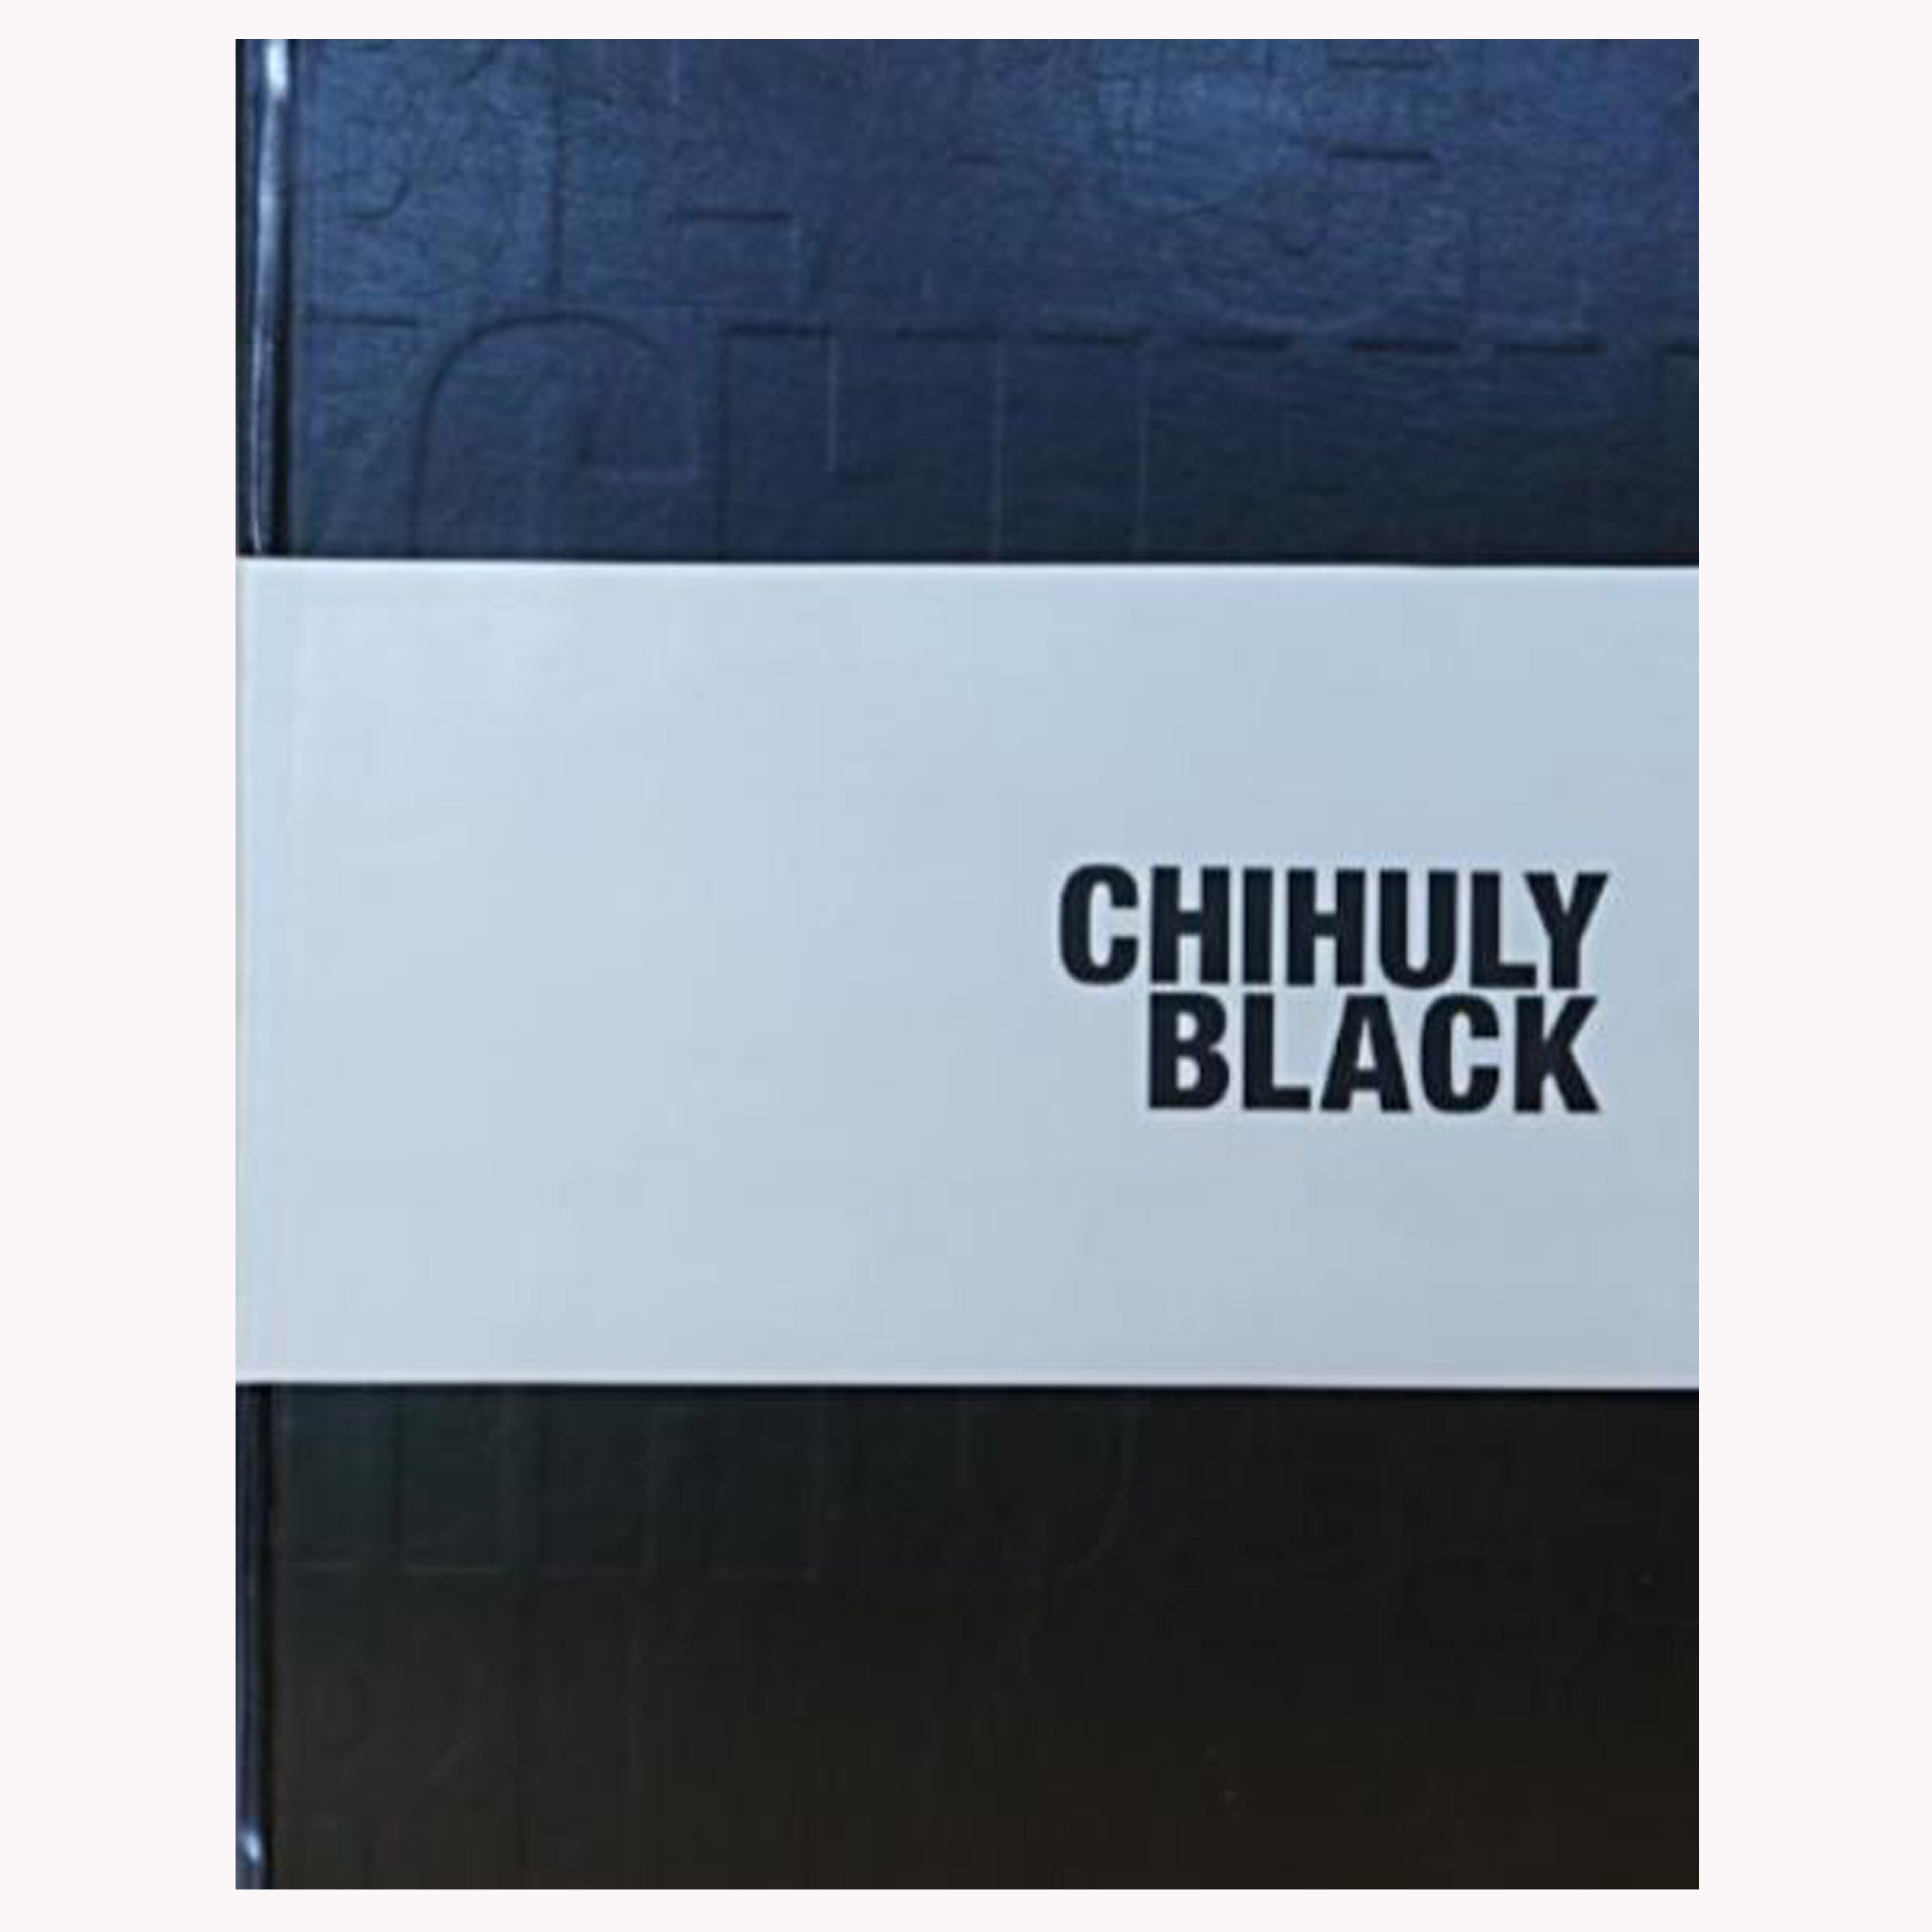 Chihuly Black